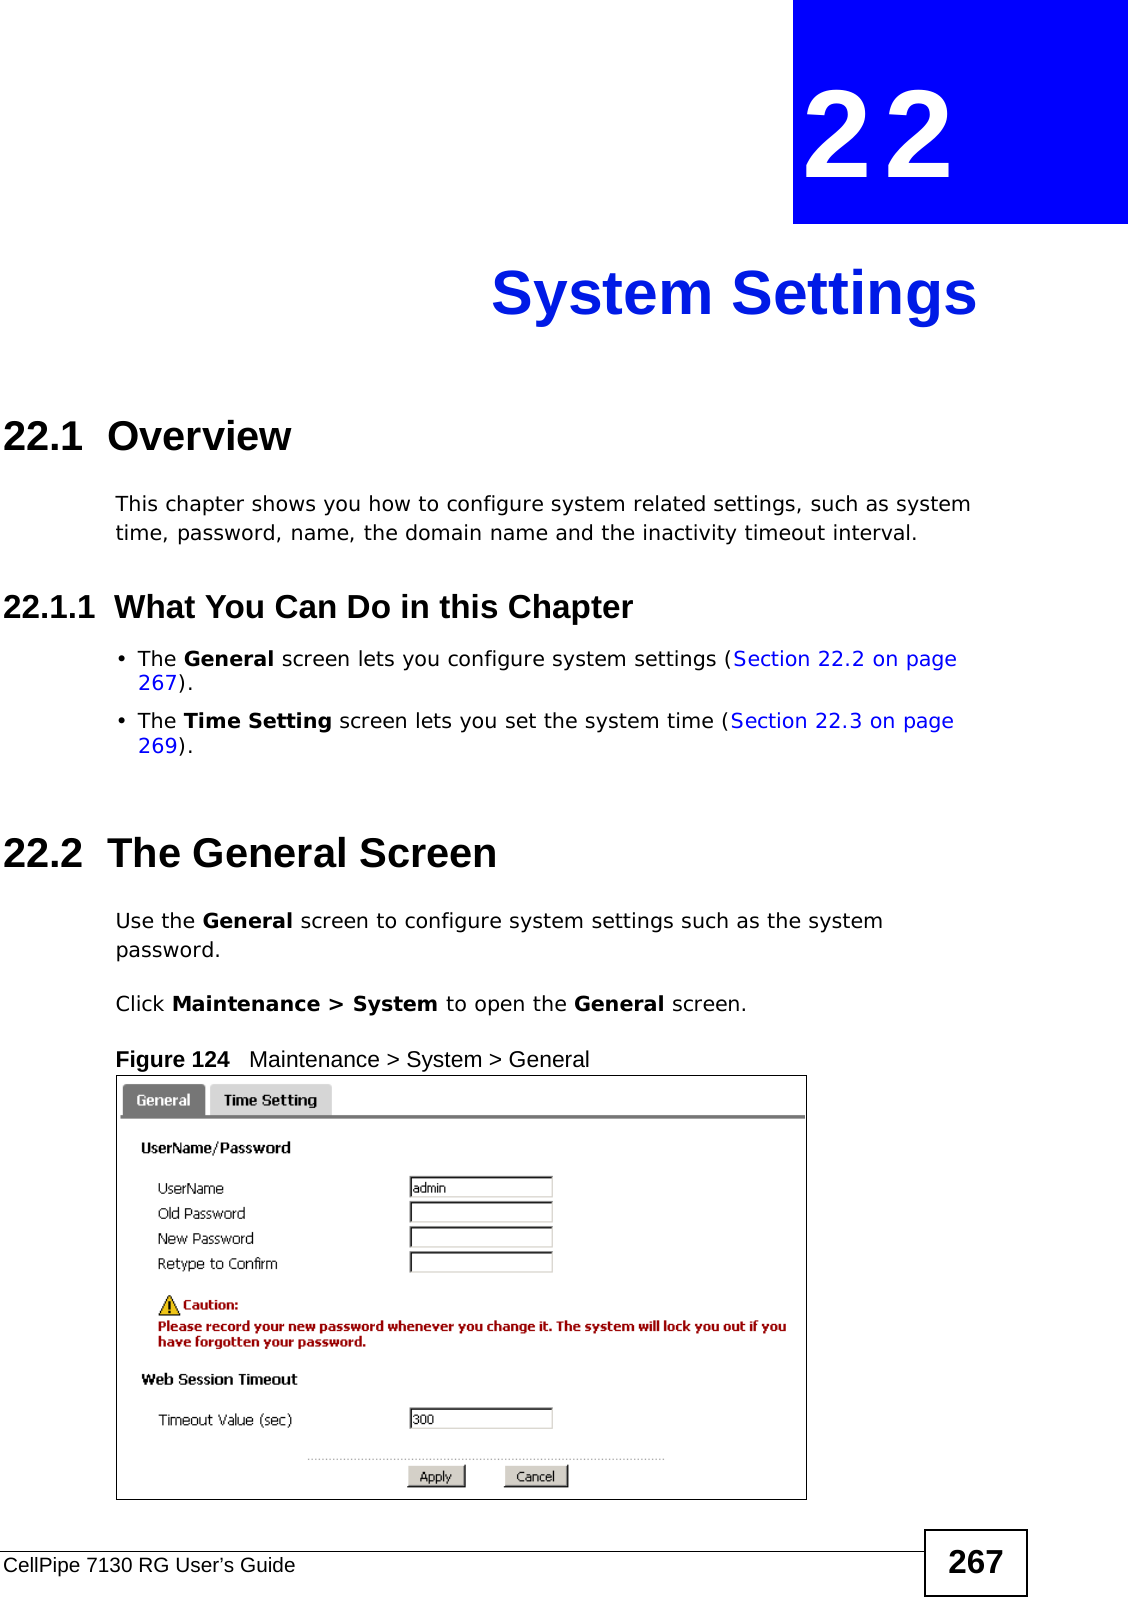 CellPipe 7130 RG User’s Guide 267CHAPTER  22 System Settings22.1  Overview This chapter shows you how to configure system related settings, such as system time, password, name, the domain name and the inactivity timeout interval.    22.1.1  What You Can Do in this Chapter•The General screen lets you configure system settings (Section 22.2 on page 267).•The Time Setting screen lets you set the system time (Section 22.3 on page 269).22.2  The General ScreenUse the General screen to configure system settings such as the system password.Click Maintenance &gt; System to open the General screen. Figure 124   Maintenance &gt; System &gt; General